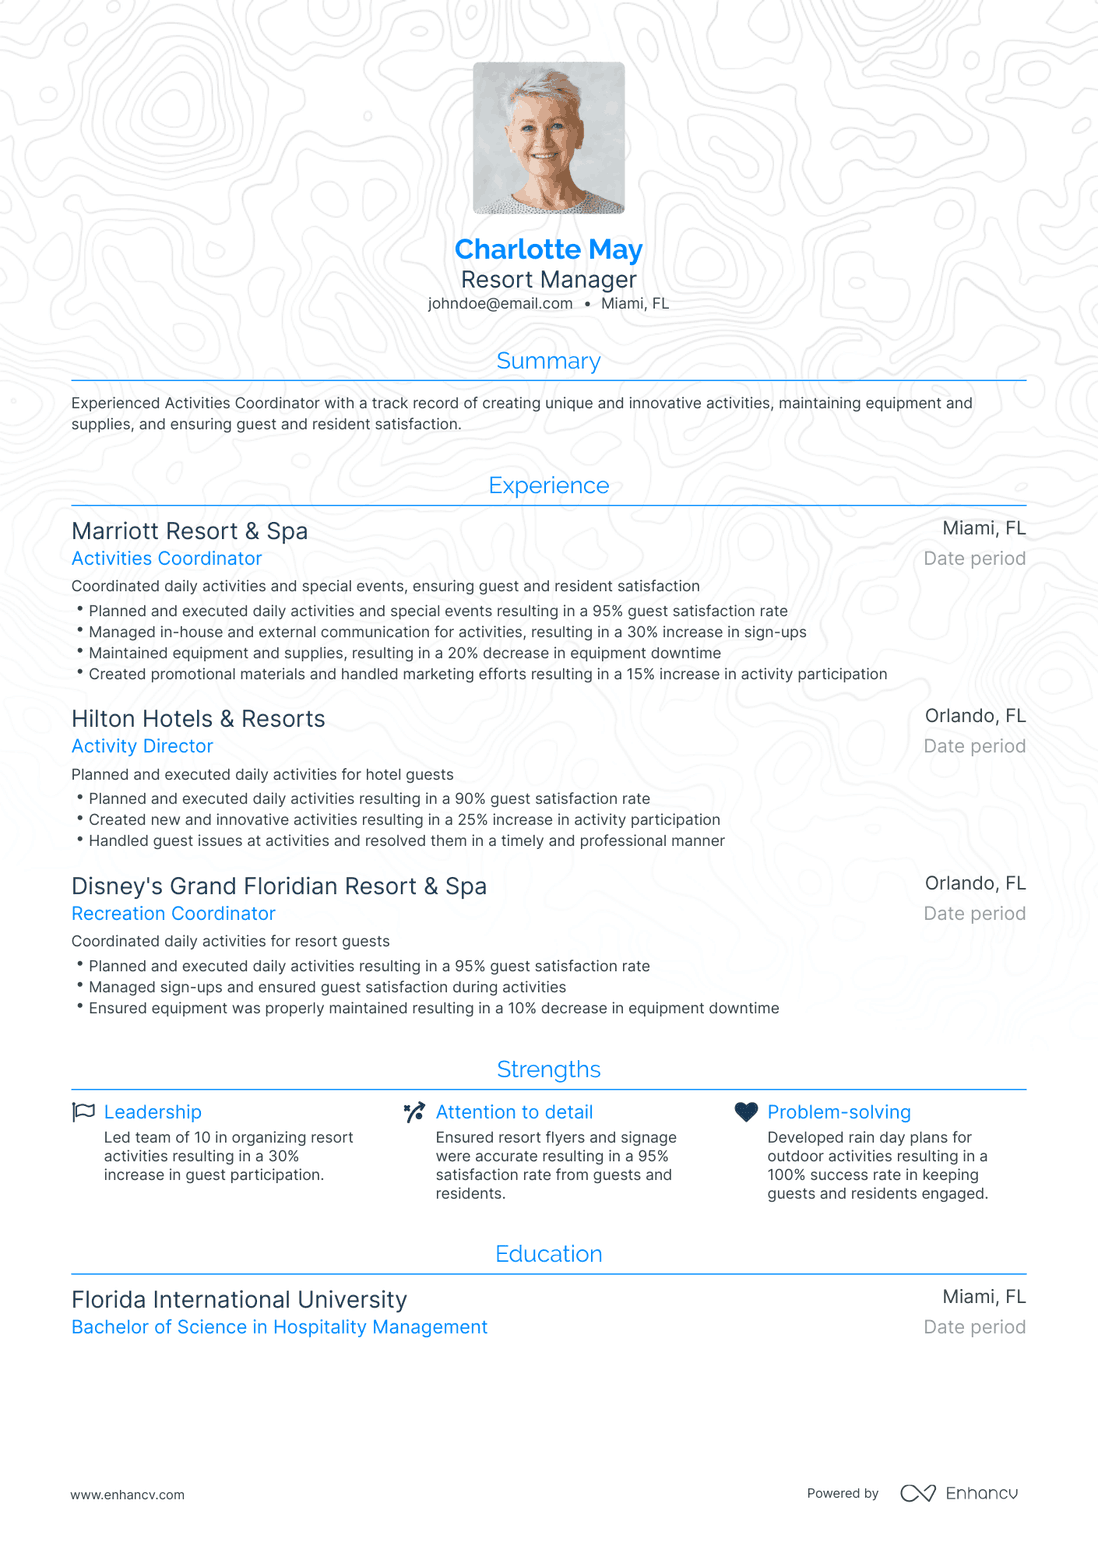 Traditional Resort Manager Resume Template